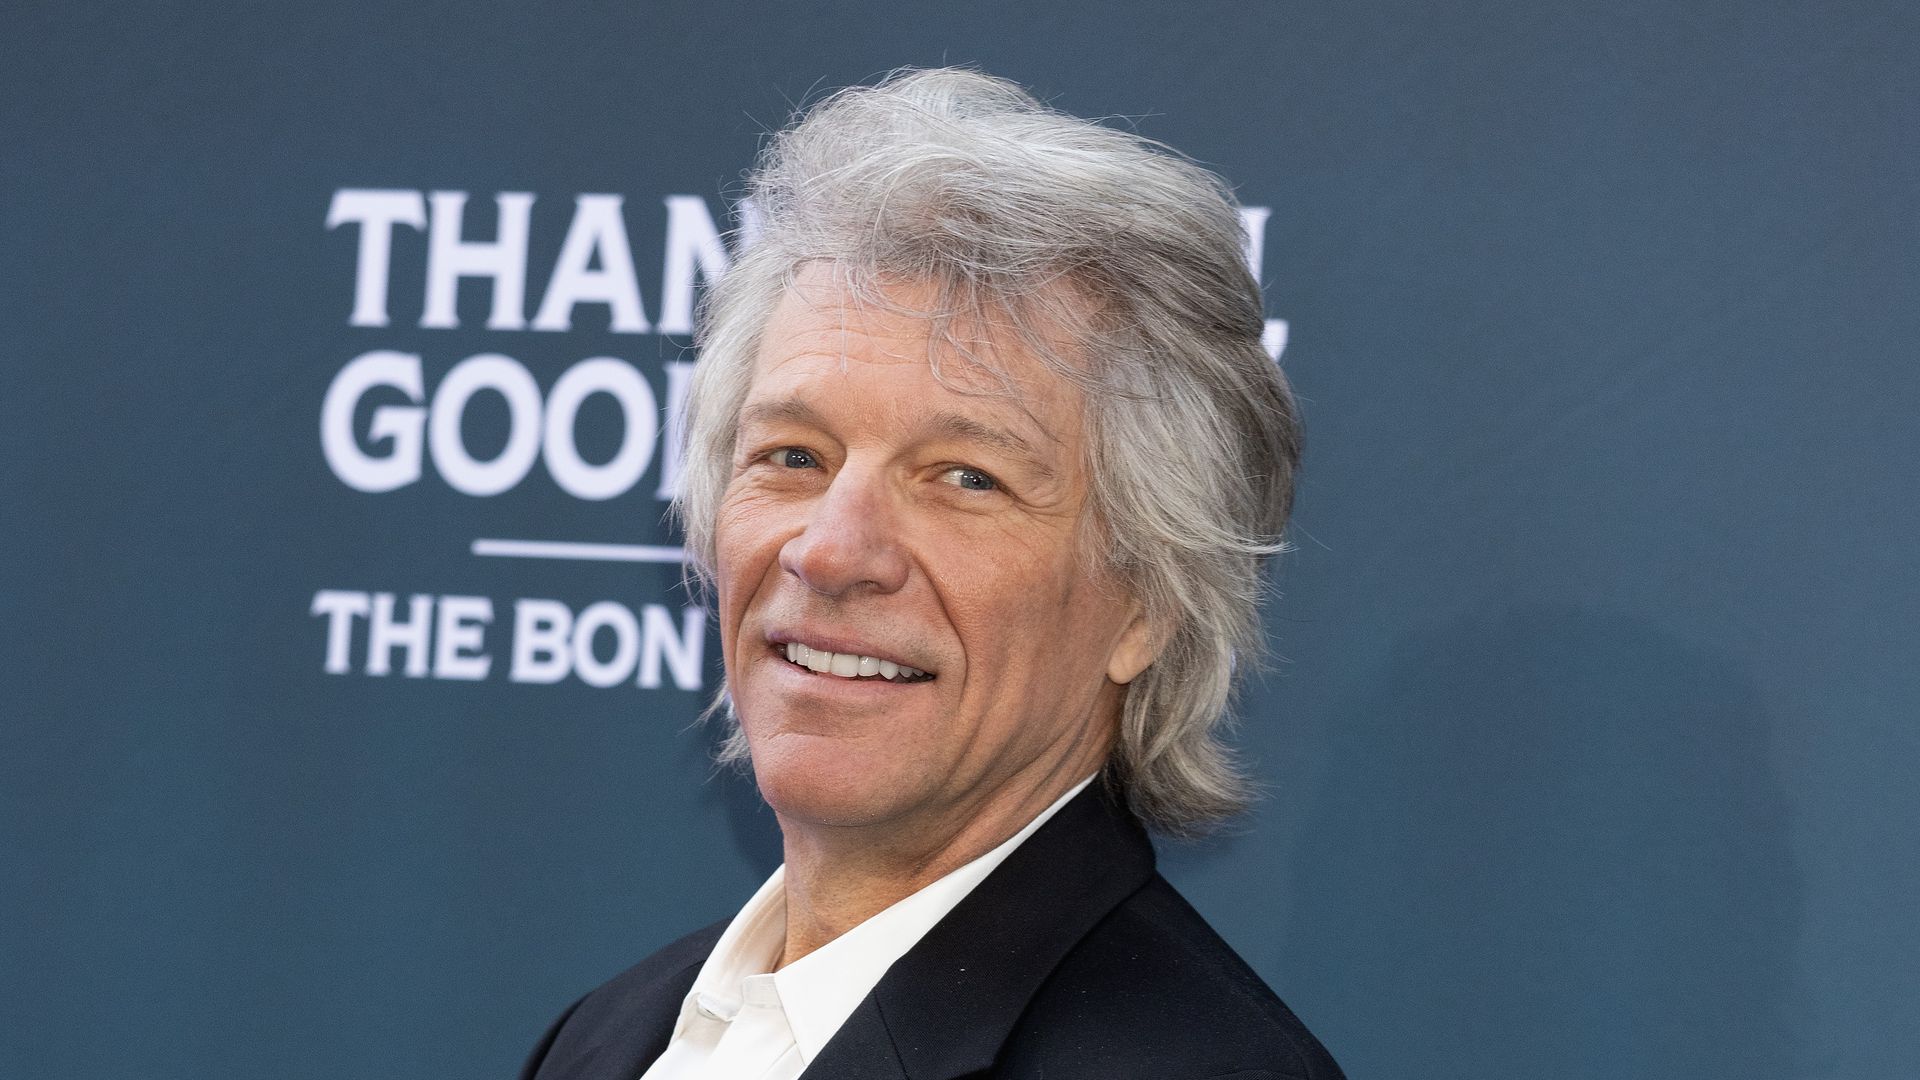 Jon Bon Jovi reveals he 'got away with murder' in marriage to Dorothea Hurley: 'I had 100 girls in my life'